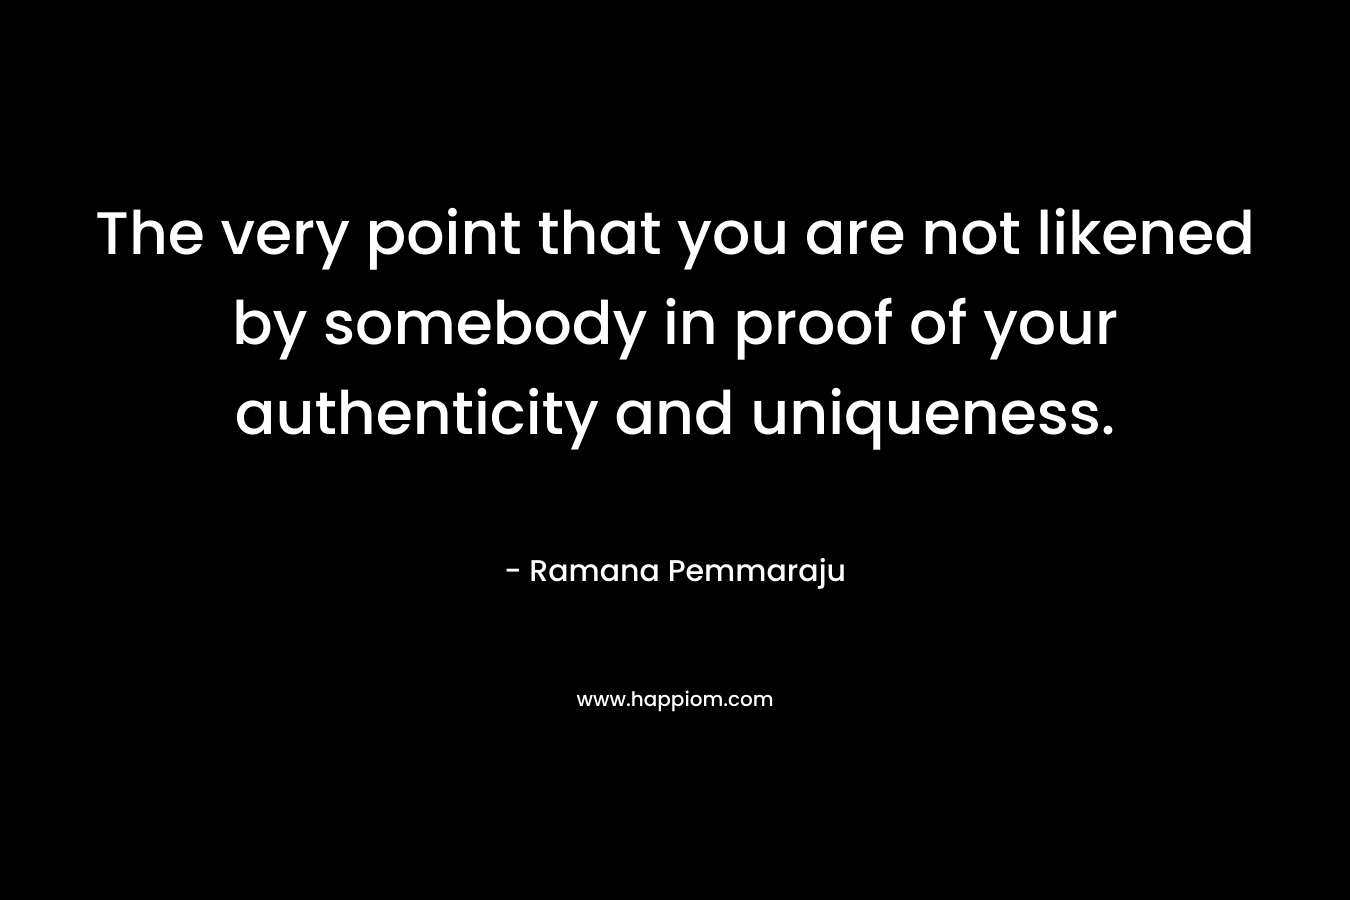 The very point that you are not likened by somebody in proof of your authenticity and uniqueness. – Ramana Pemmaraju